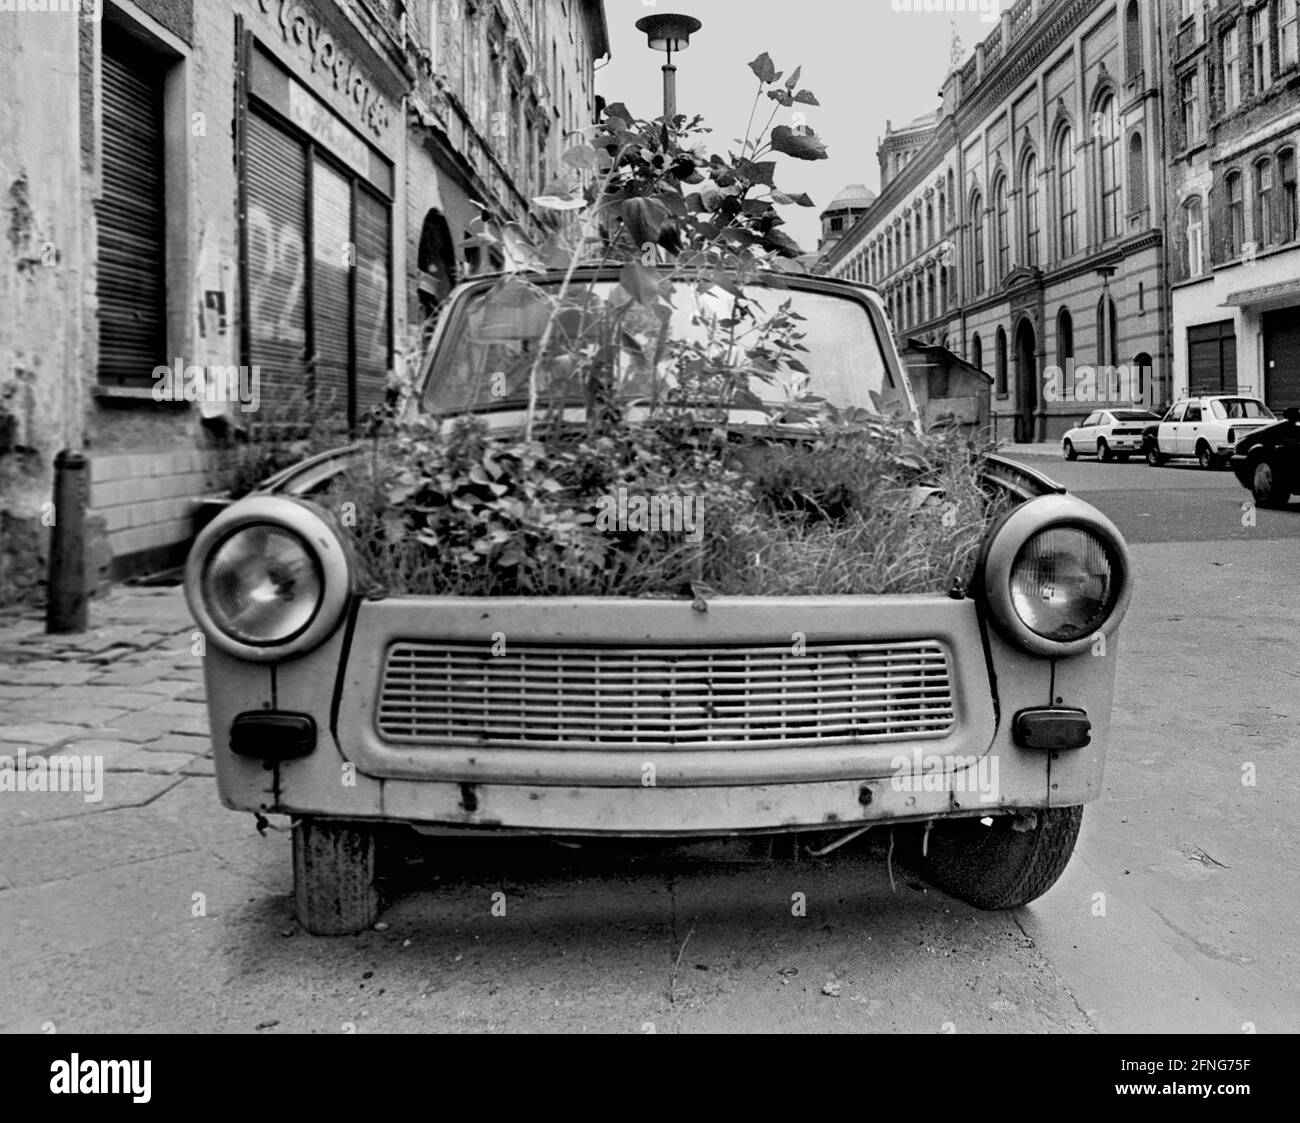 Berlin-Bezirke / DDR / 8 / 1991. The symbol of the GDR prosperity, the Trabi, as a flower box, Tucholskystrasse, Berlin-Mitte, symbol for the end of the GDR // Economy / Flowers / DDr-End *** Local Caption *** This car was called Trabi, symbol for east german wealth. Now it is a flower box and a Symbol for the end of german communism. [automated translation] Stock Photo